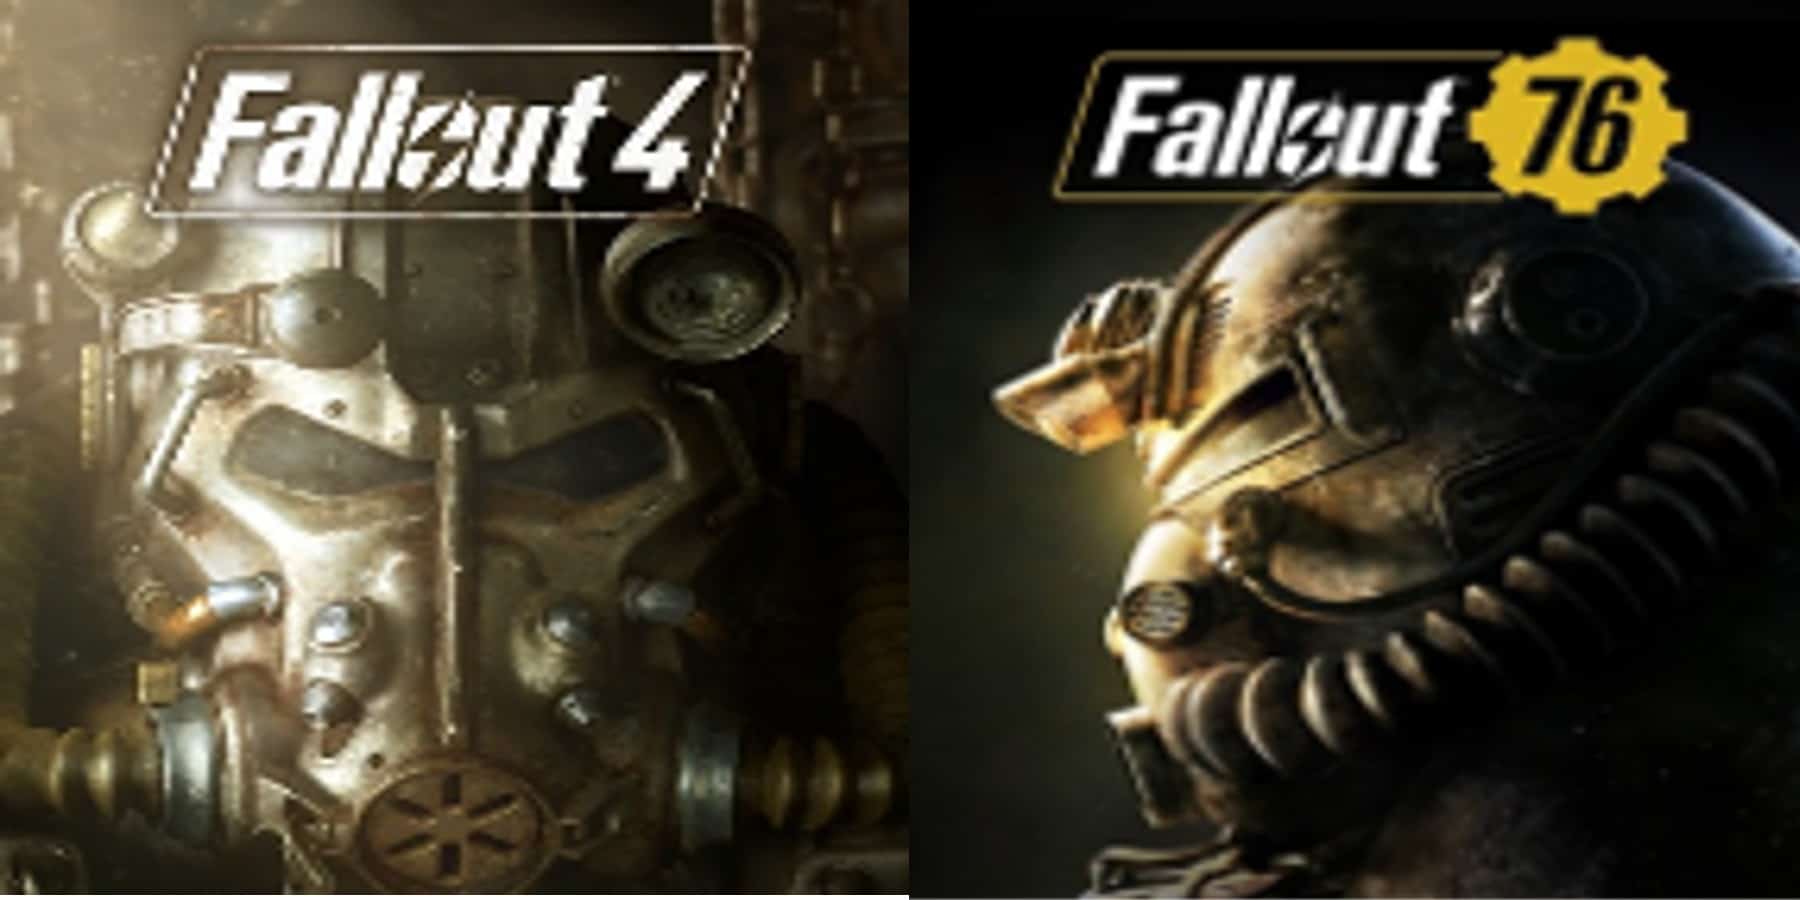 Fallout 76 Vs 4 Fallout 4 vs Fallout 76: Which is Better For You? - Cheat Code Central